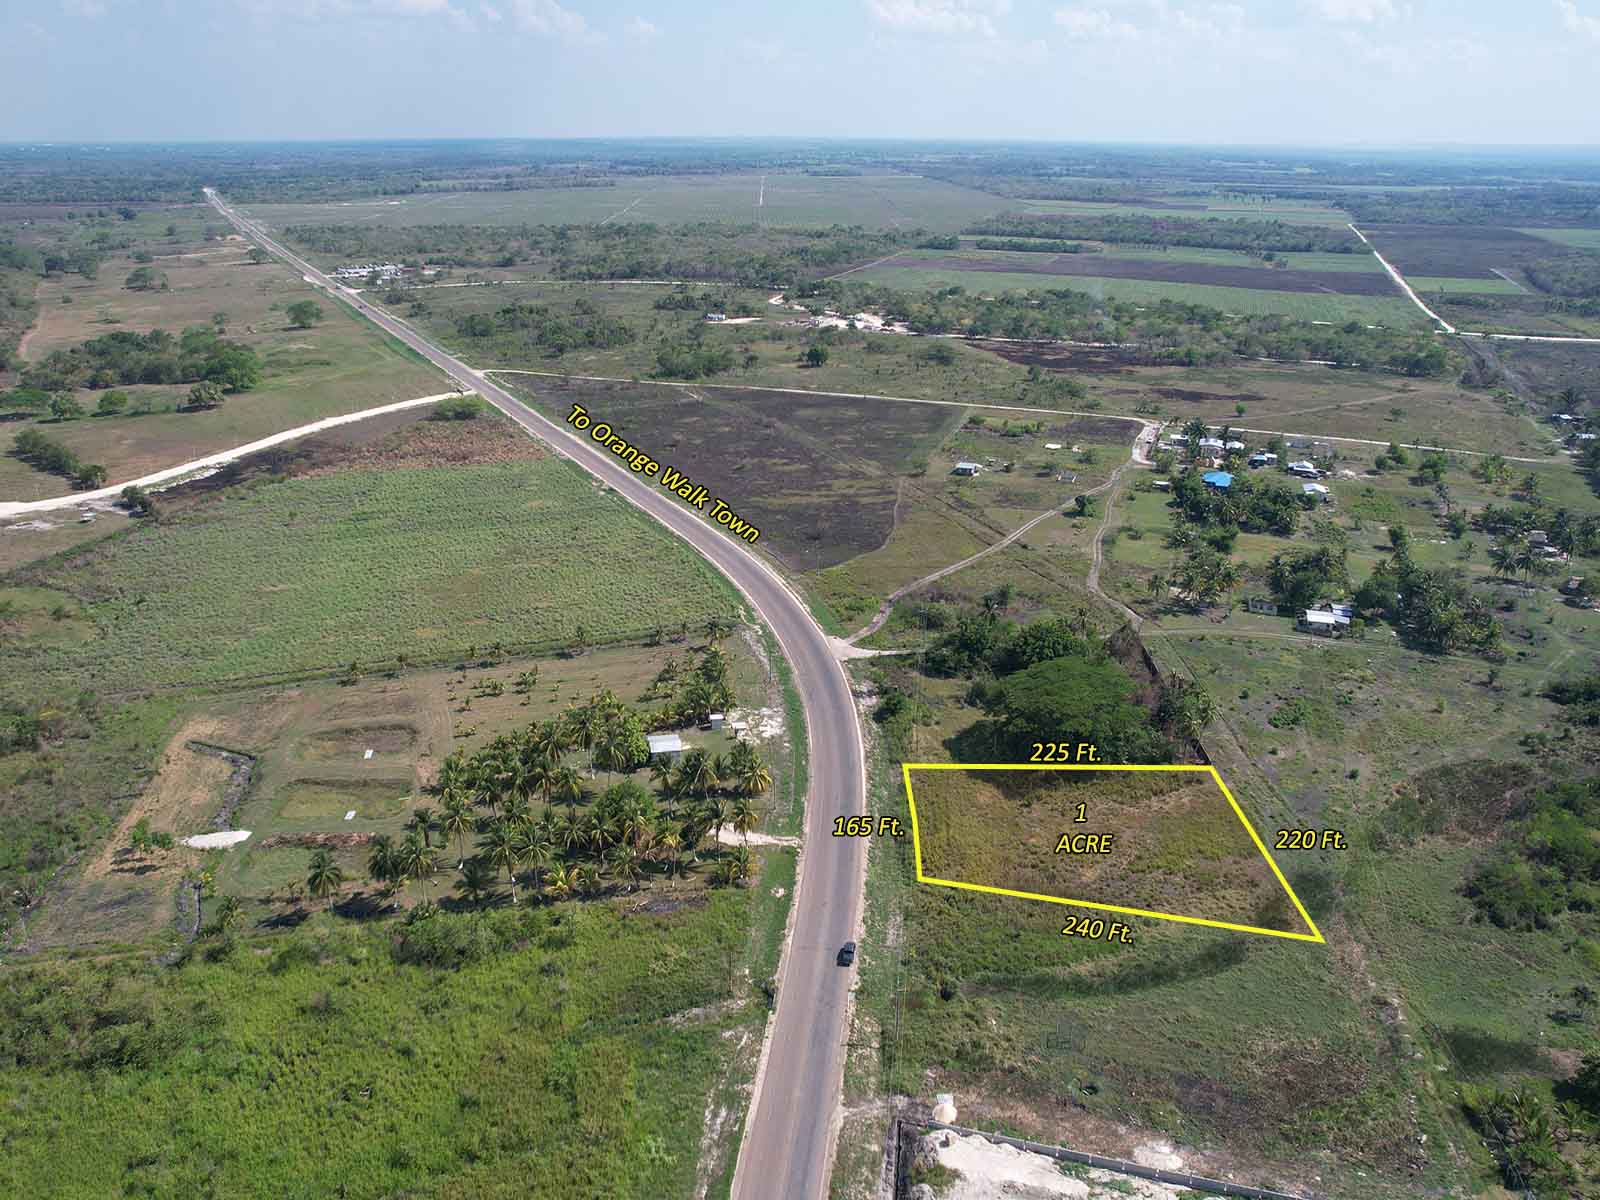 FOR-SALE: 1 Acre Highway Land Located at the Entrance of San Jose/San Pablo Orange Walk District.